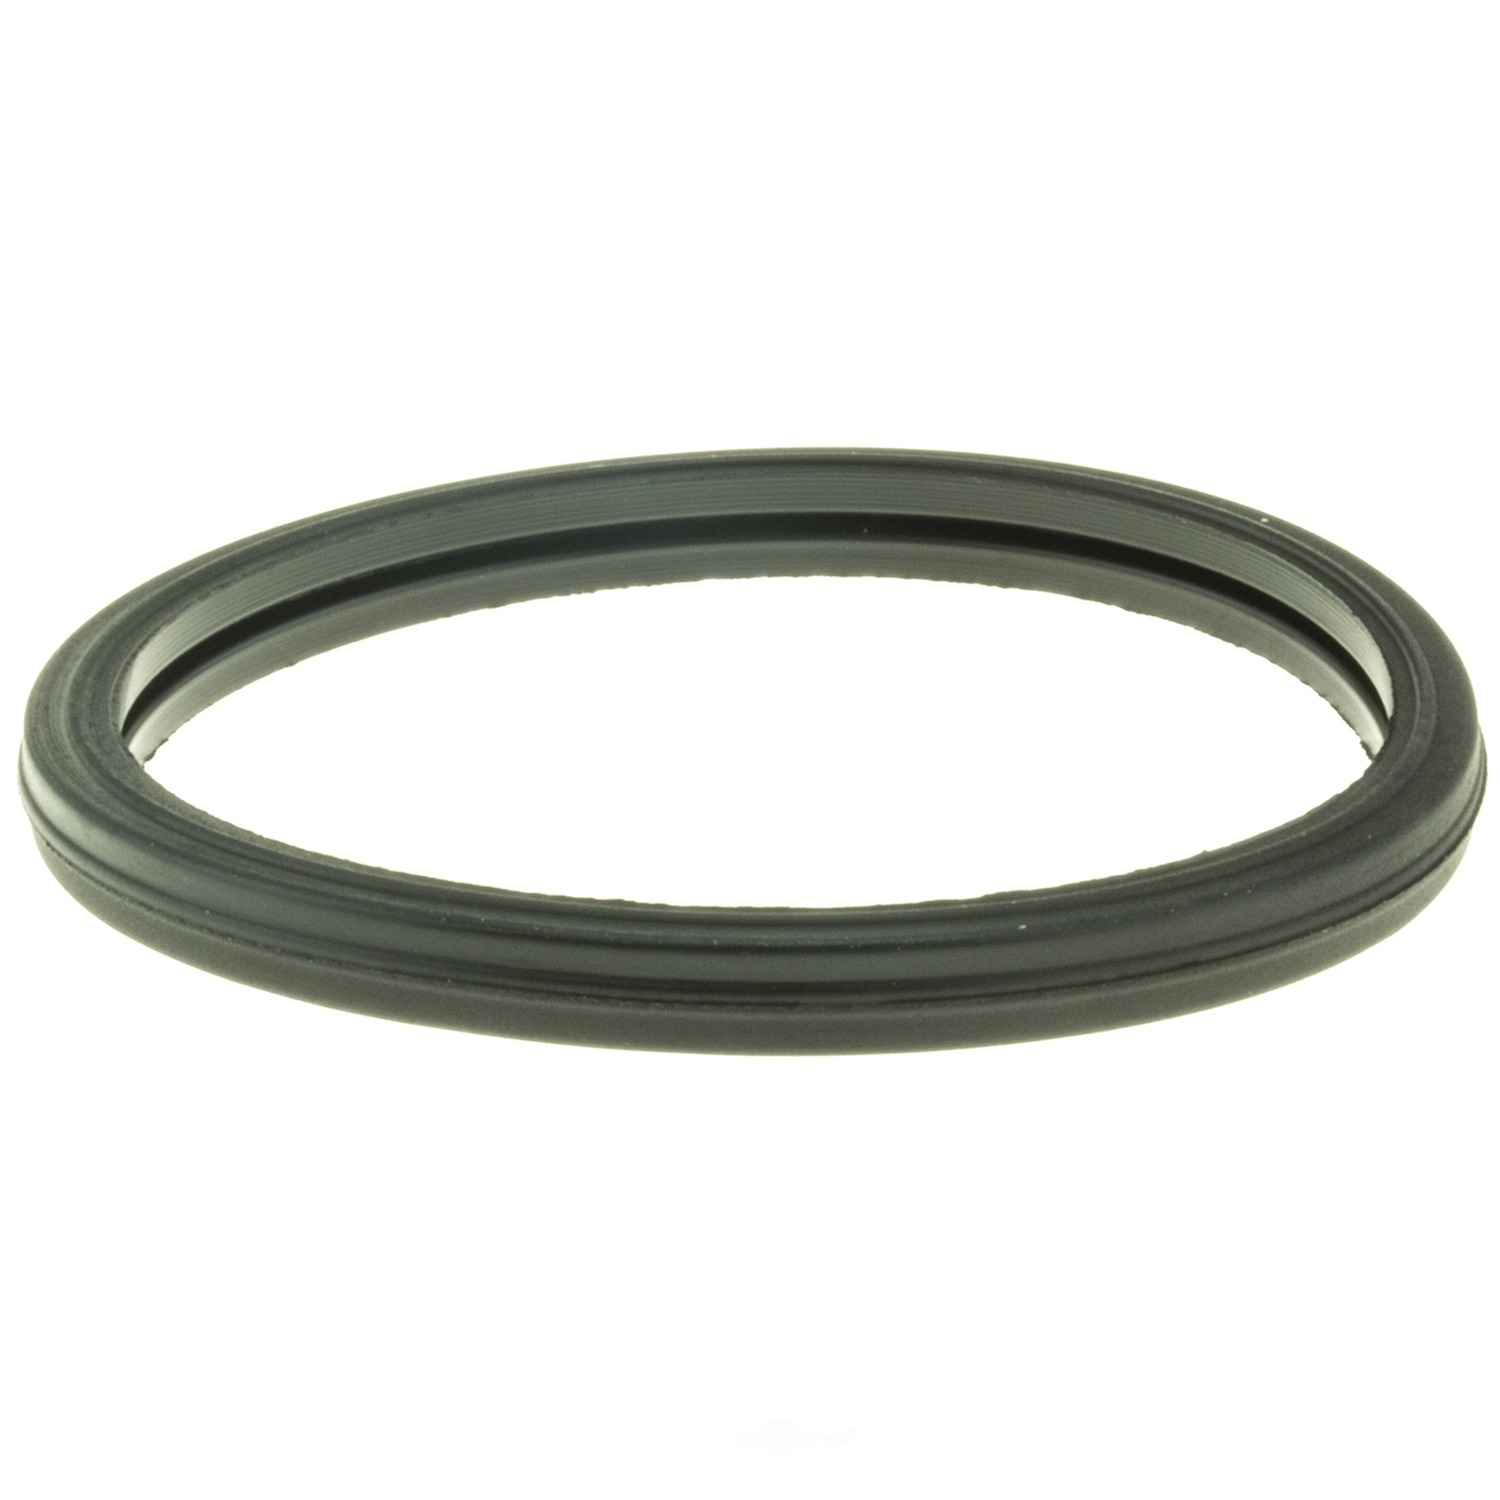 STANT - Thermostat Seal - STN 27286